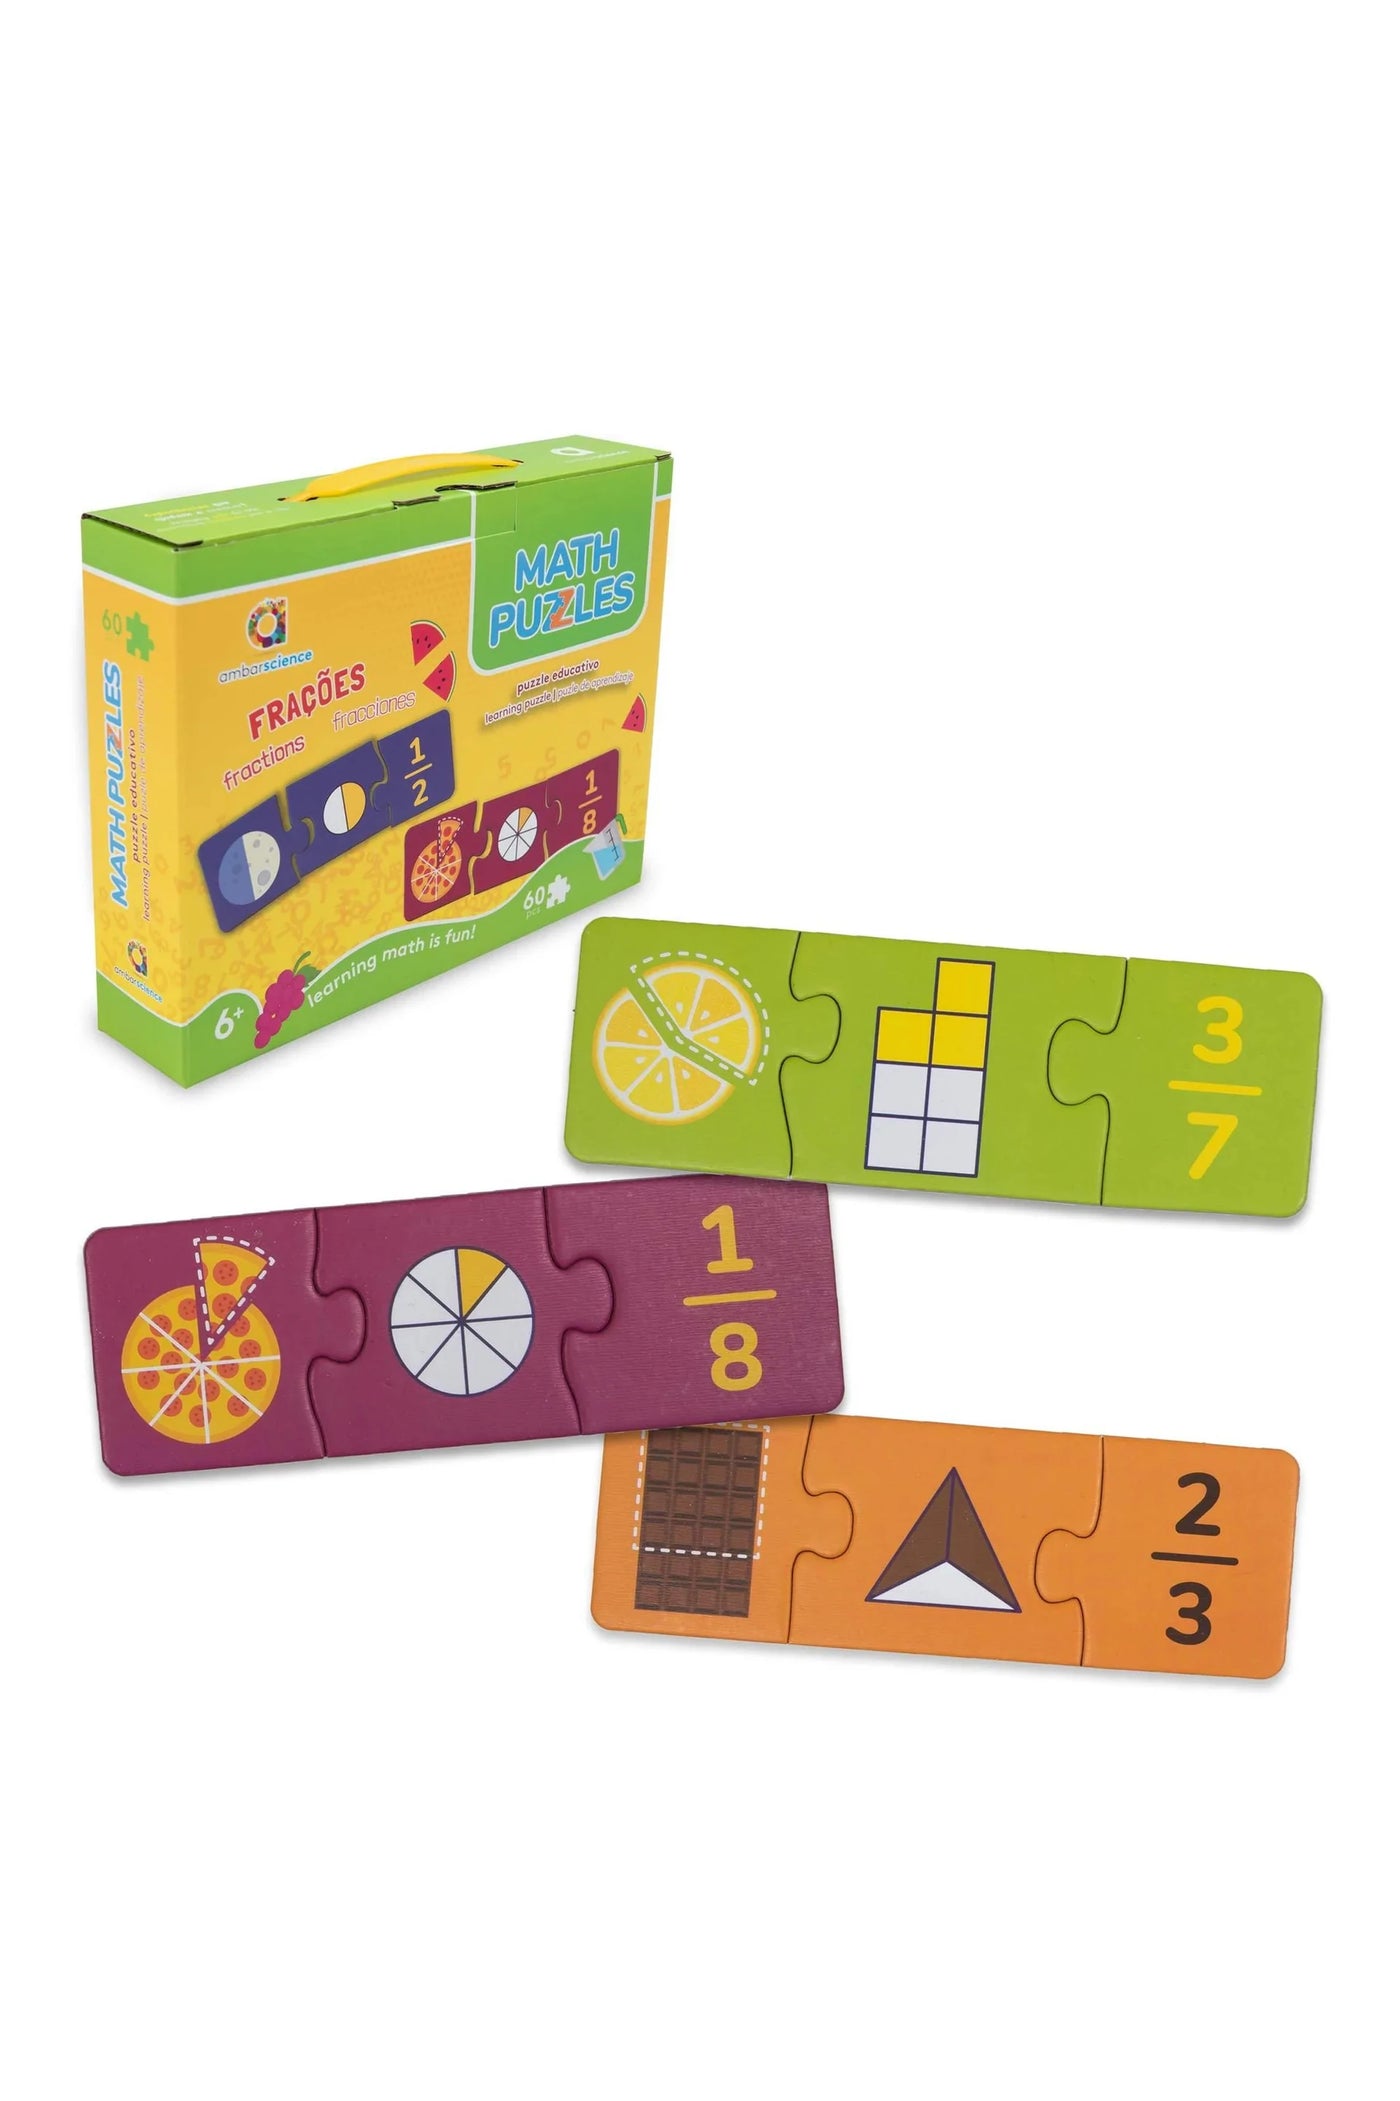 Math Puzzles - Fractions (6+) 